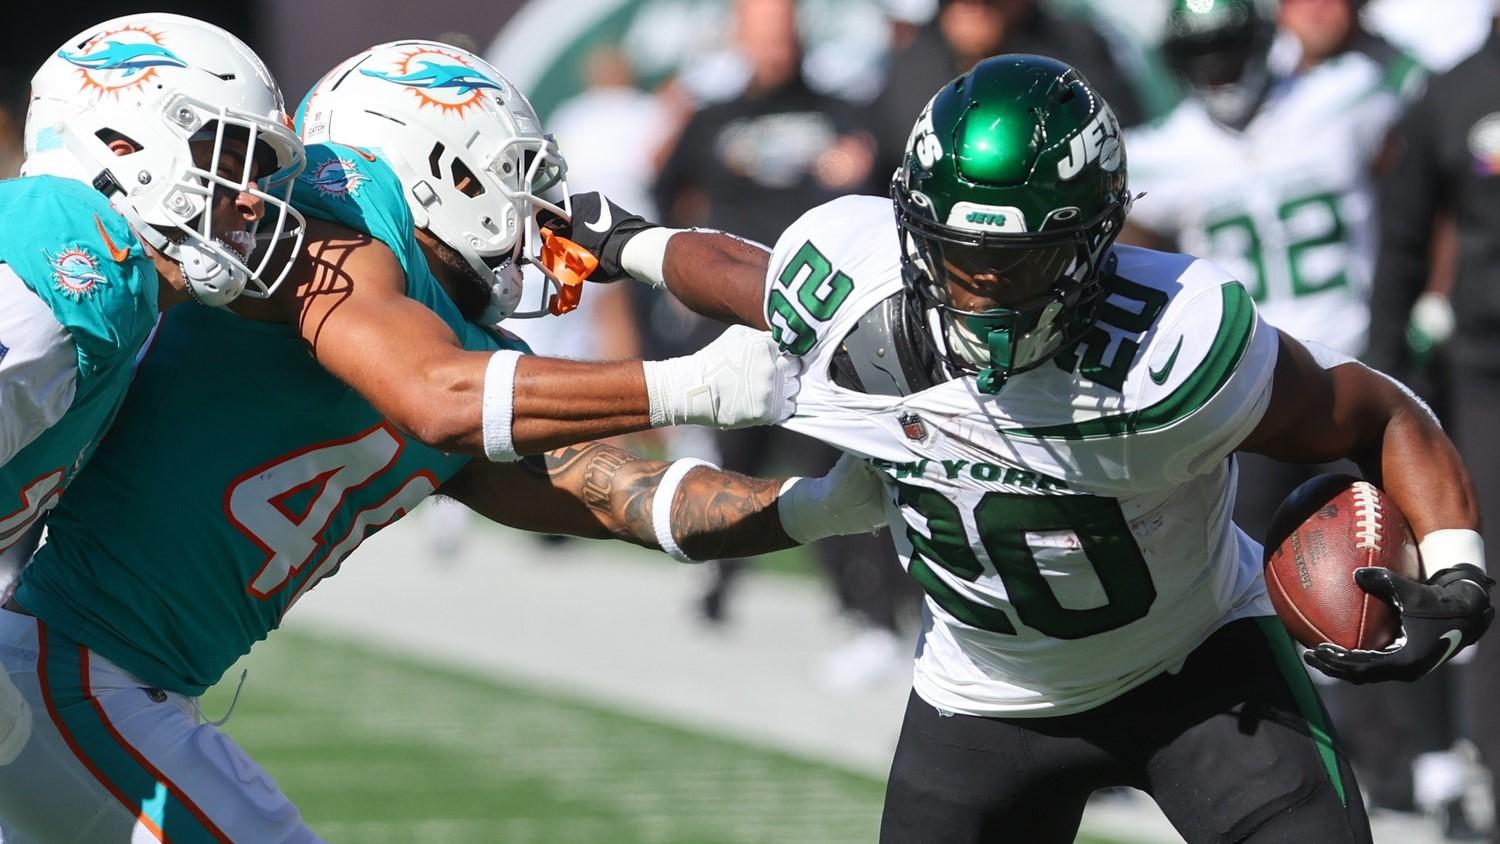 Oct 9, 2022; East Rutherford, New Jersey, USA; New York Jets running back Breece Hall (20) runs with the ball while Miami Dolphins cornerback Nik Needham (40) attempts to tackle him during the first half at MetLife Stadium. / Ed Mulholland-USA TODAY Sports